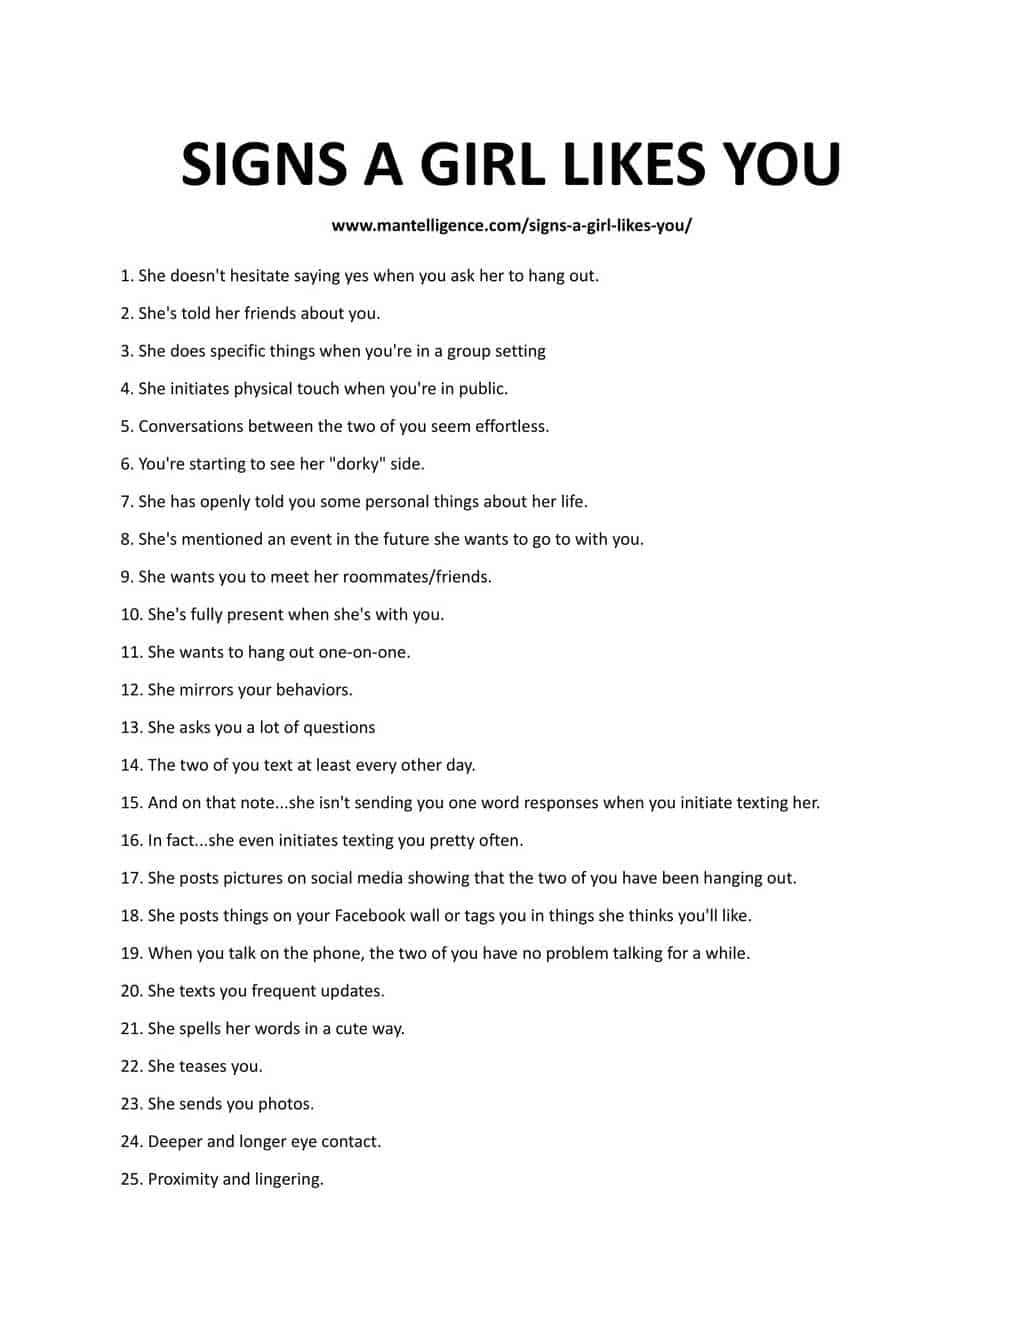 Signs that a girl likes a guy